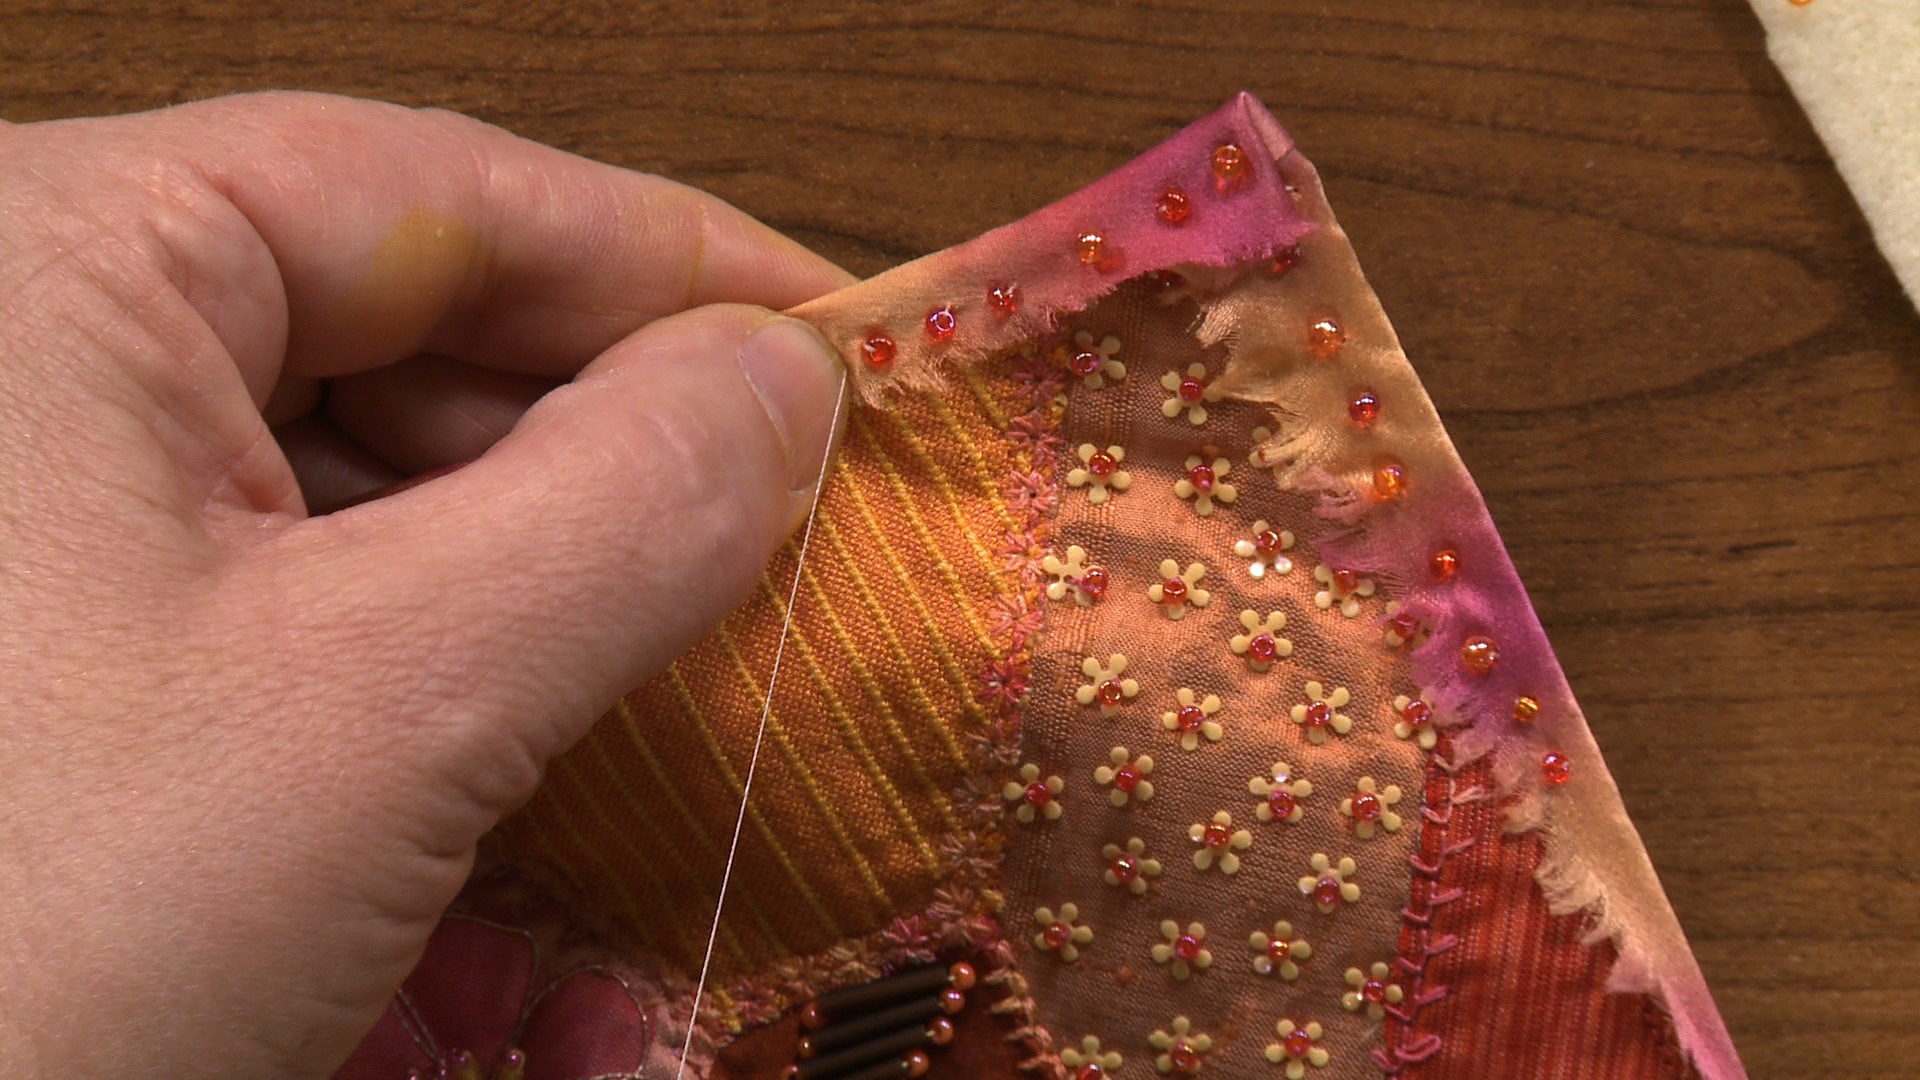 Binding a Quilt with Ribbon and Beads product featured image thumbnail.